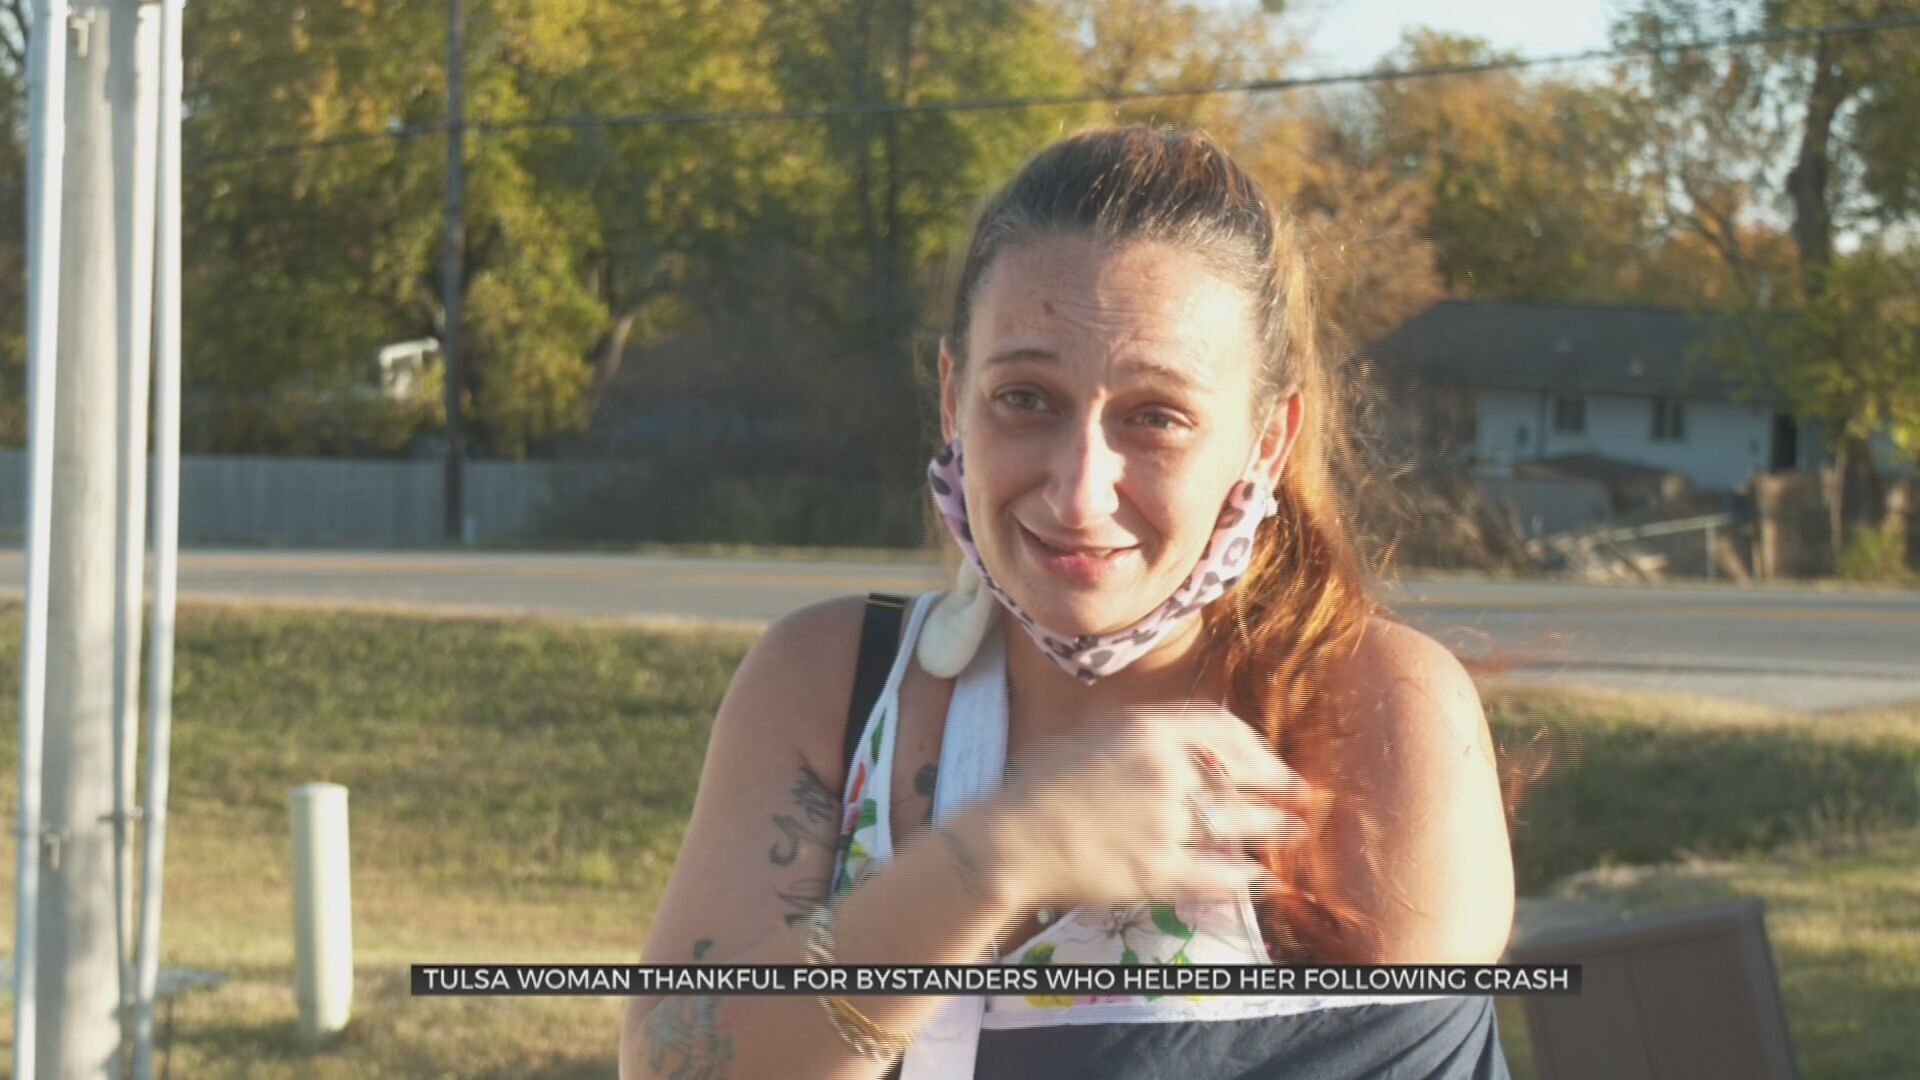 Tulsa Woman Thankful For Bystanders Who Helped Her After Car Crash 